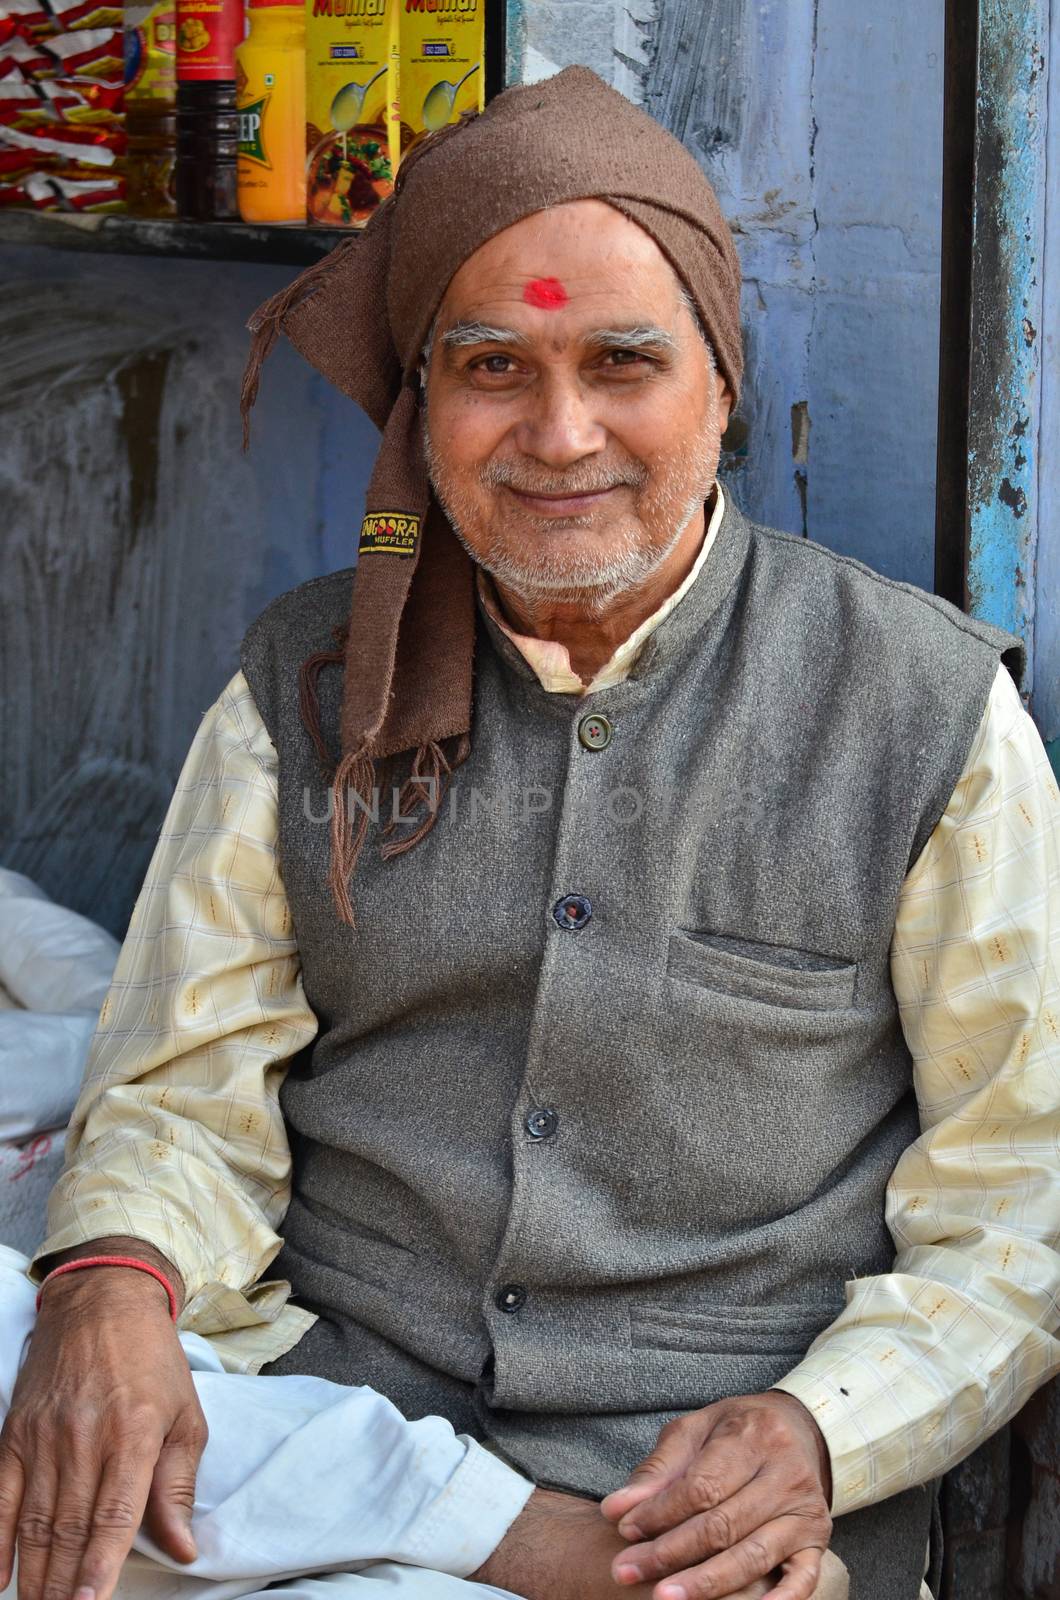 Jodhpur, India - January 1, 2015: Unidentified Indian man in the market on January 1, 2015 in Jodhpur, India. Jodhpur is know as the blue city.